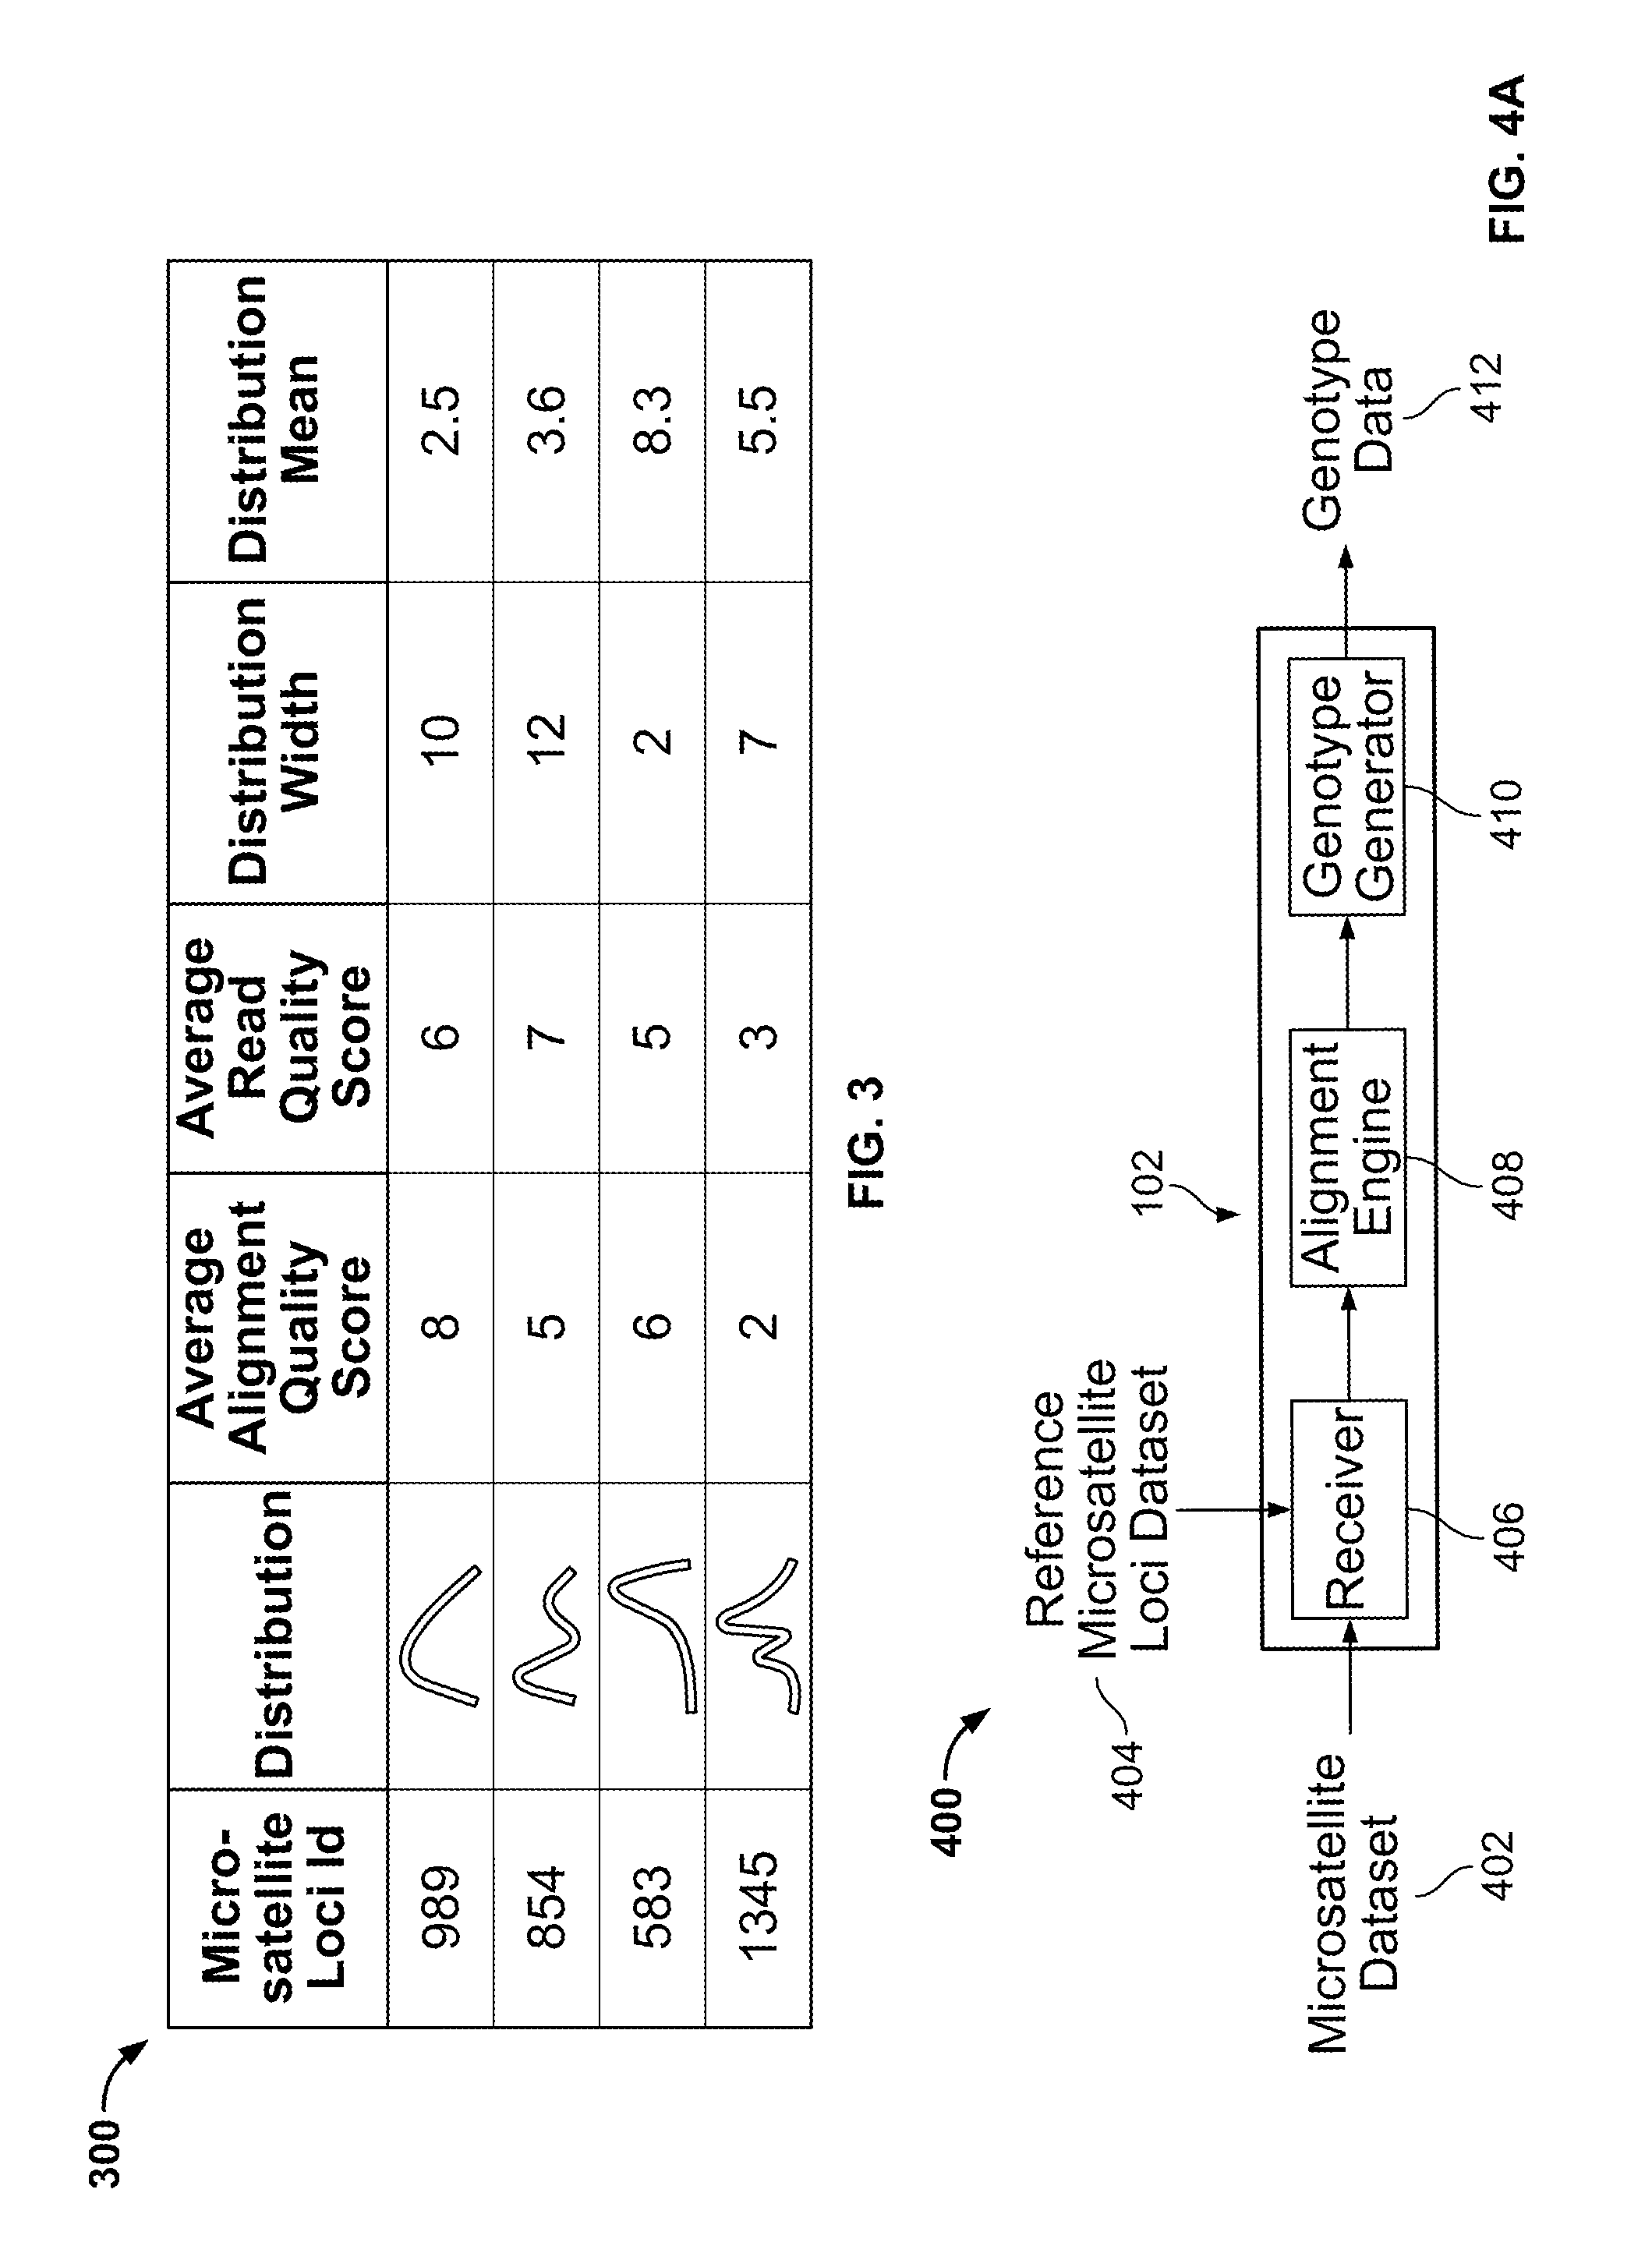 Methods and Compositions for Identifying Global Microsatellite Instability and for Characterizing Informative Microsatellite Loci